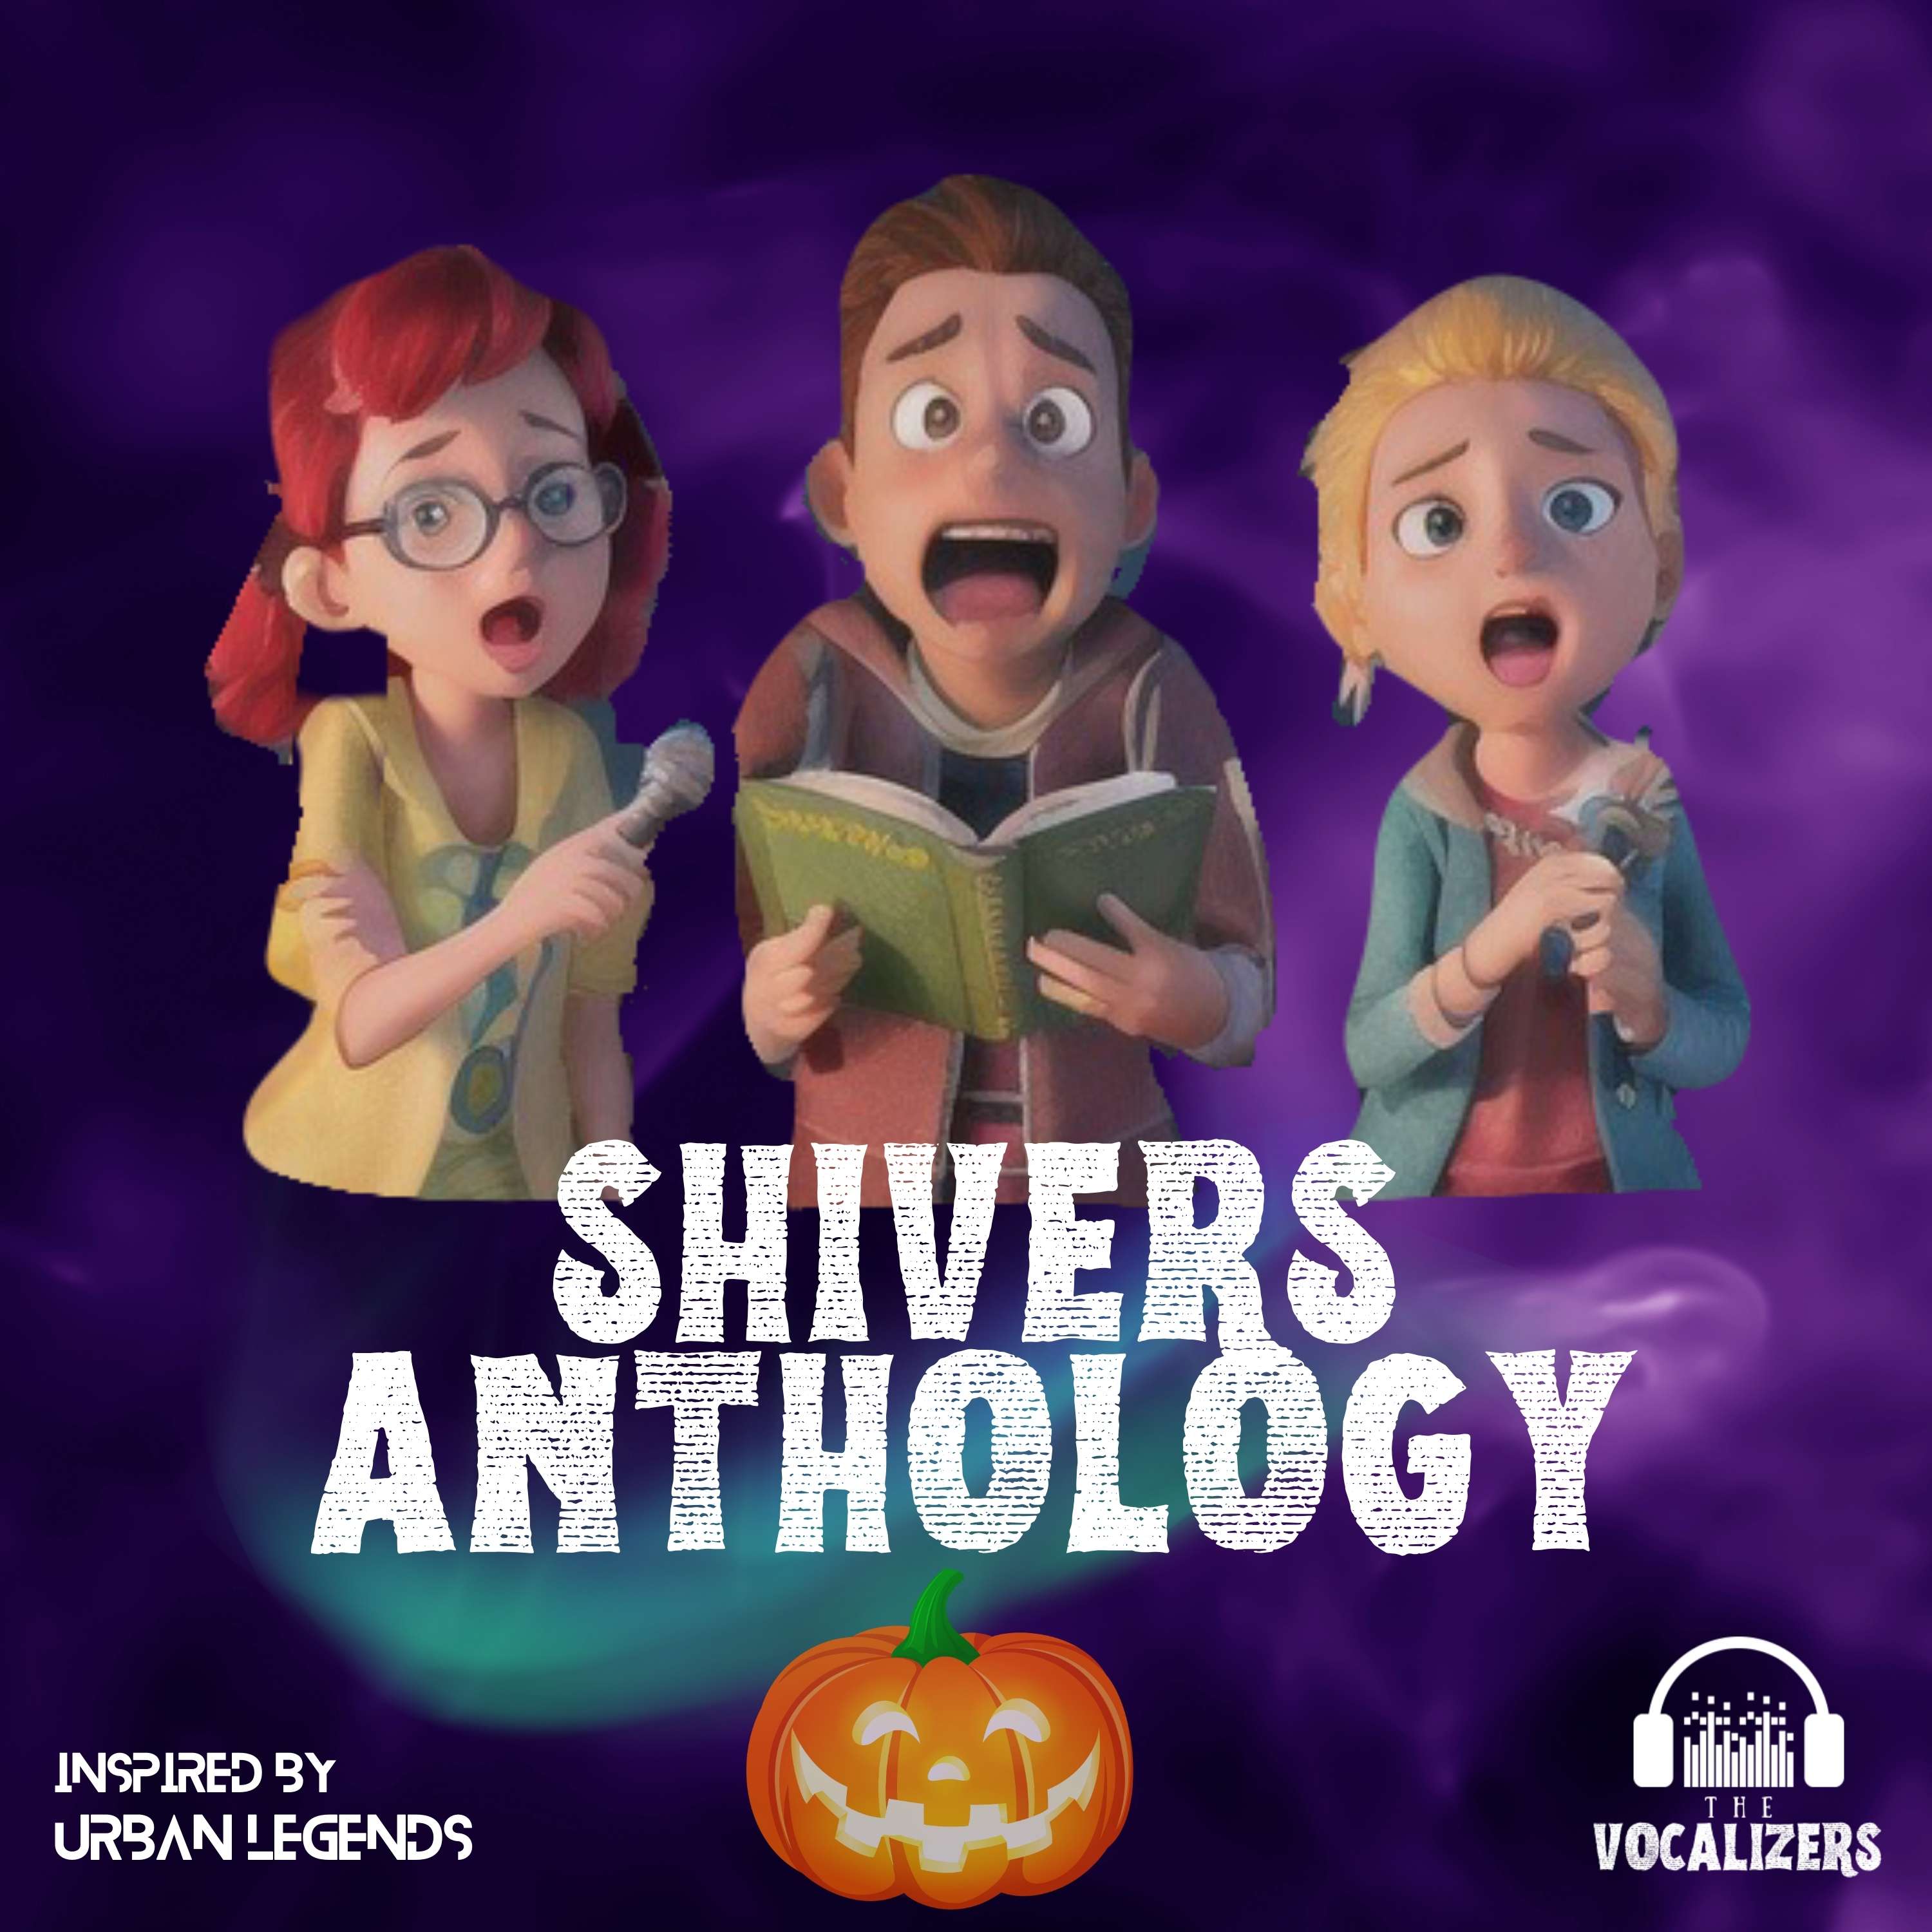 Show artwork for SHIVERS ANTHOLOGY